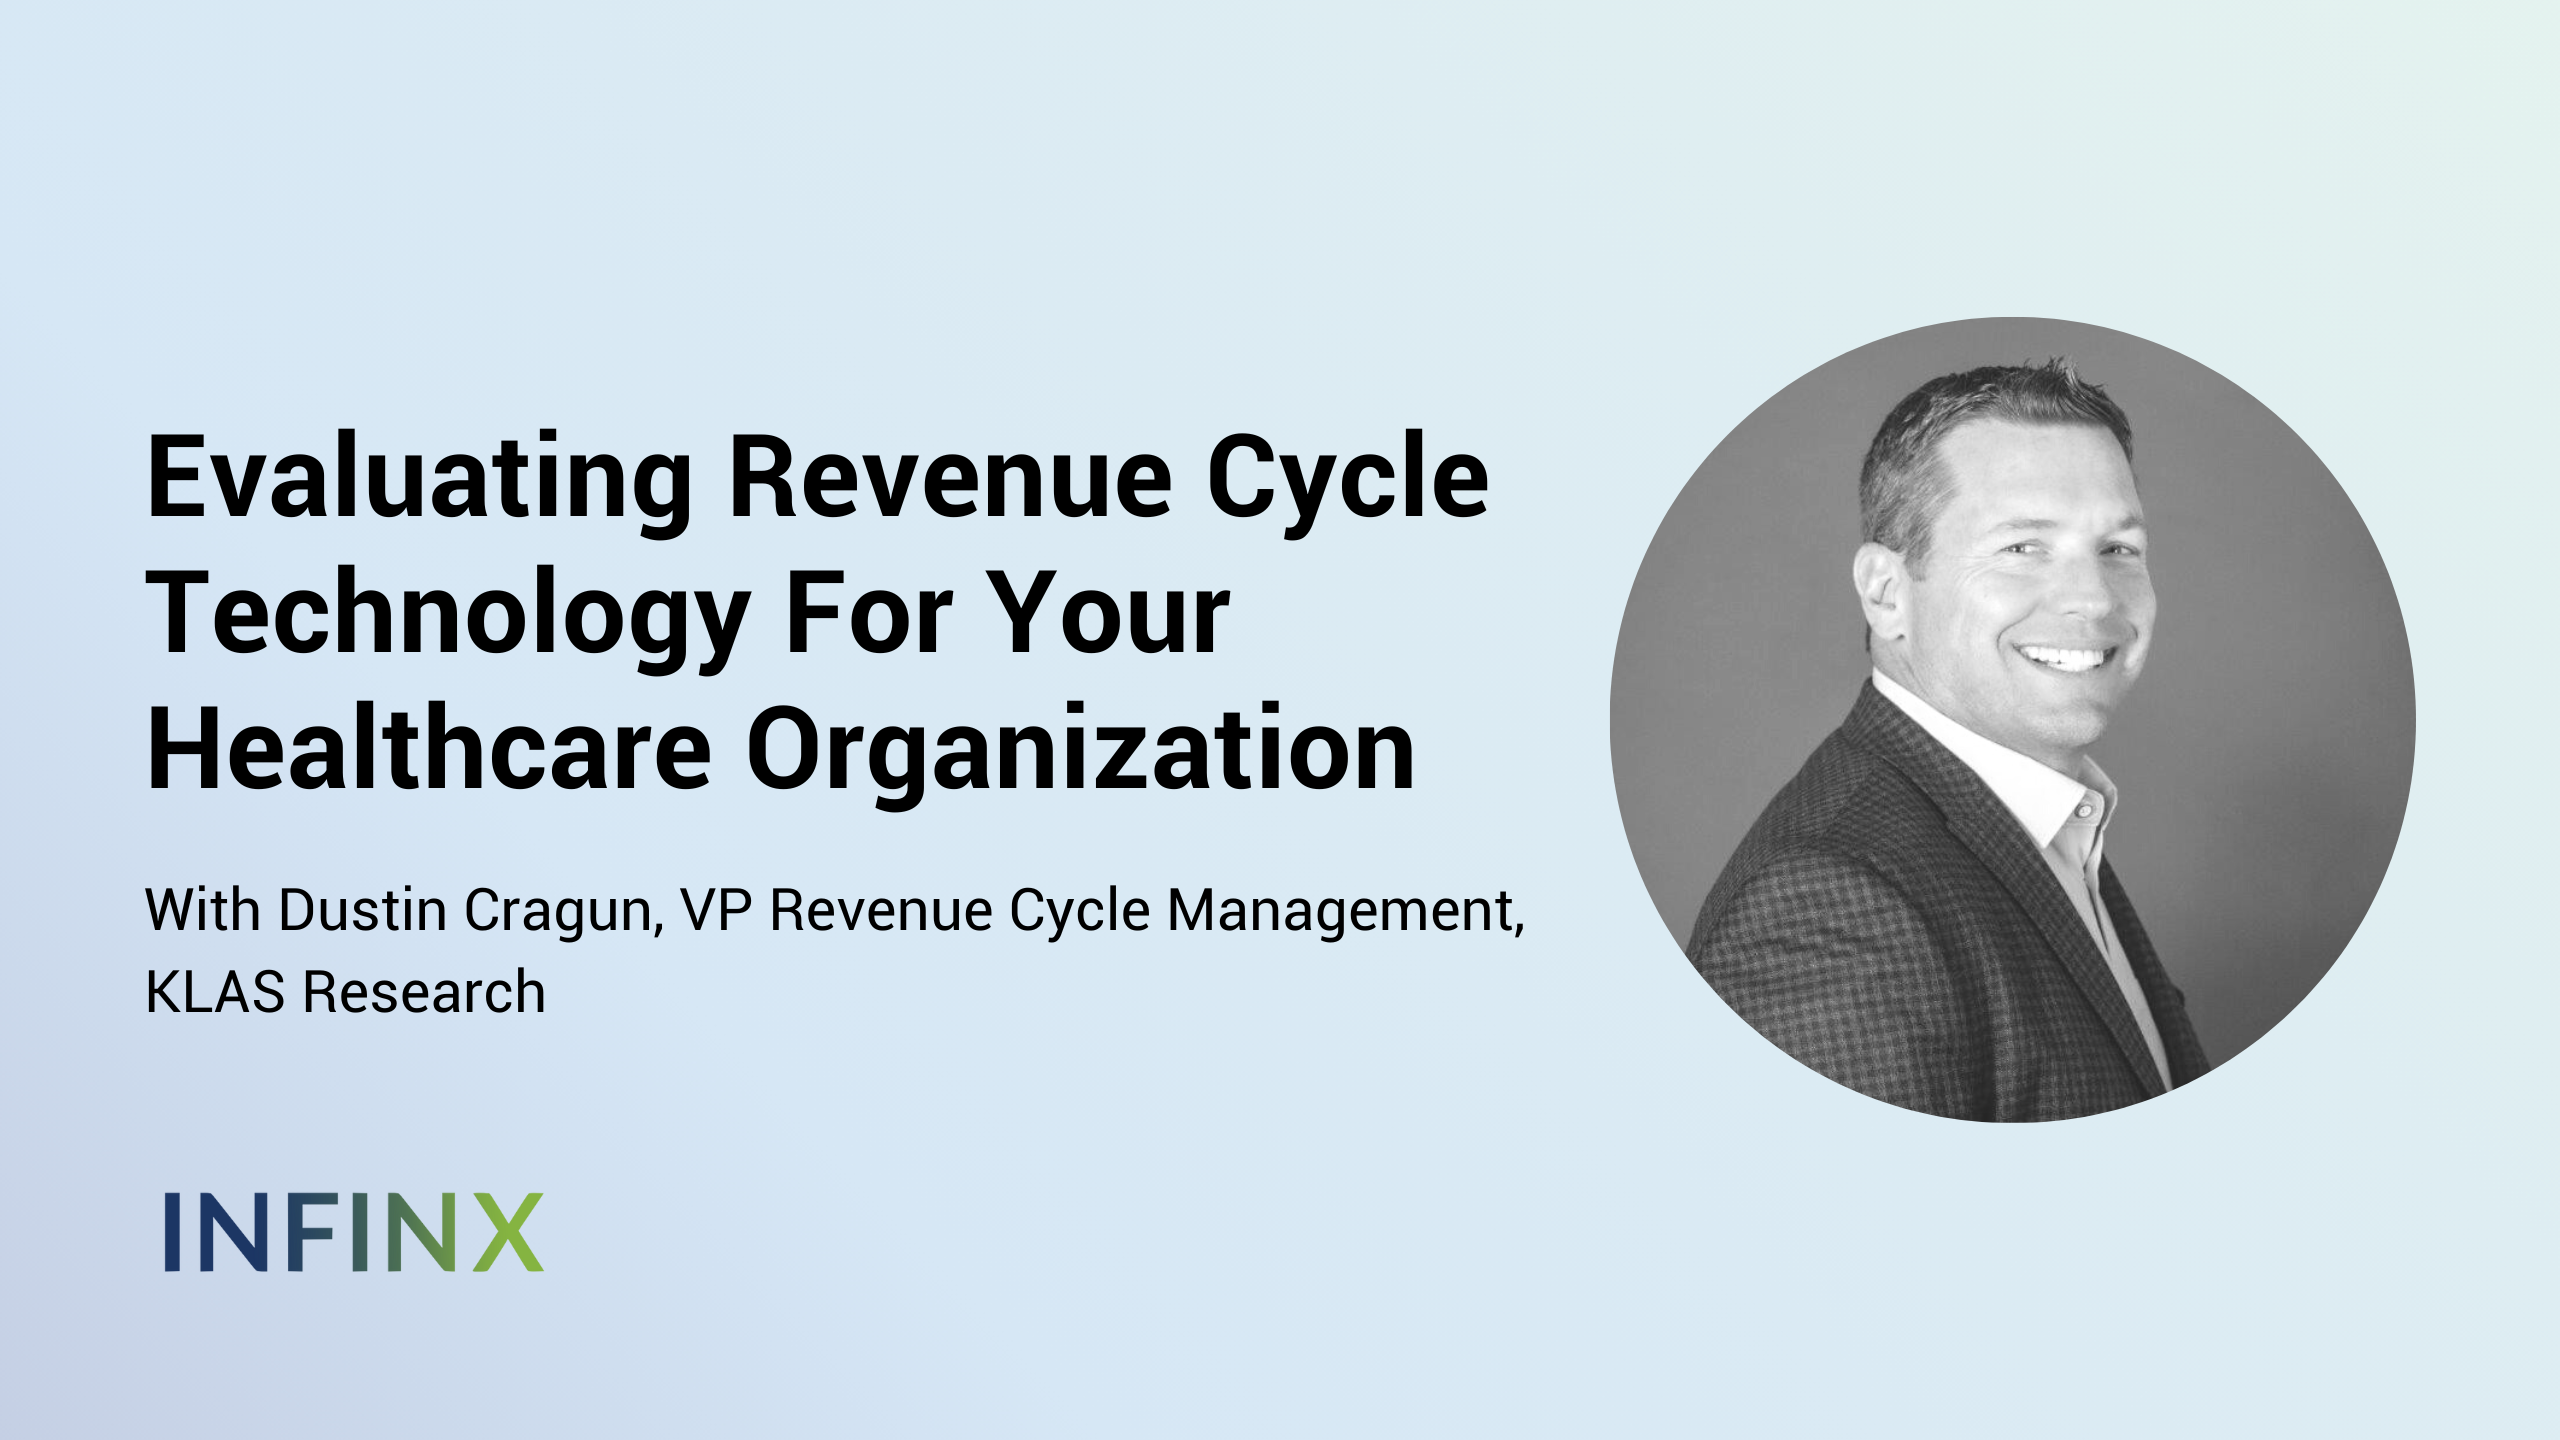 Evaluating Revenue Cycle Technology For Your Healthcare Organization With KLAS Research VP Revenue Cycle Management Dustin Cragun Infinx Office Hours Revenue Cycle Optimized